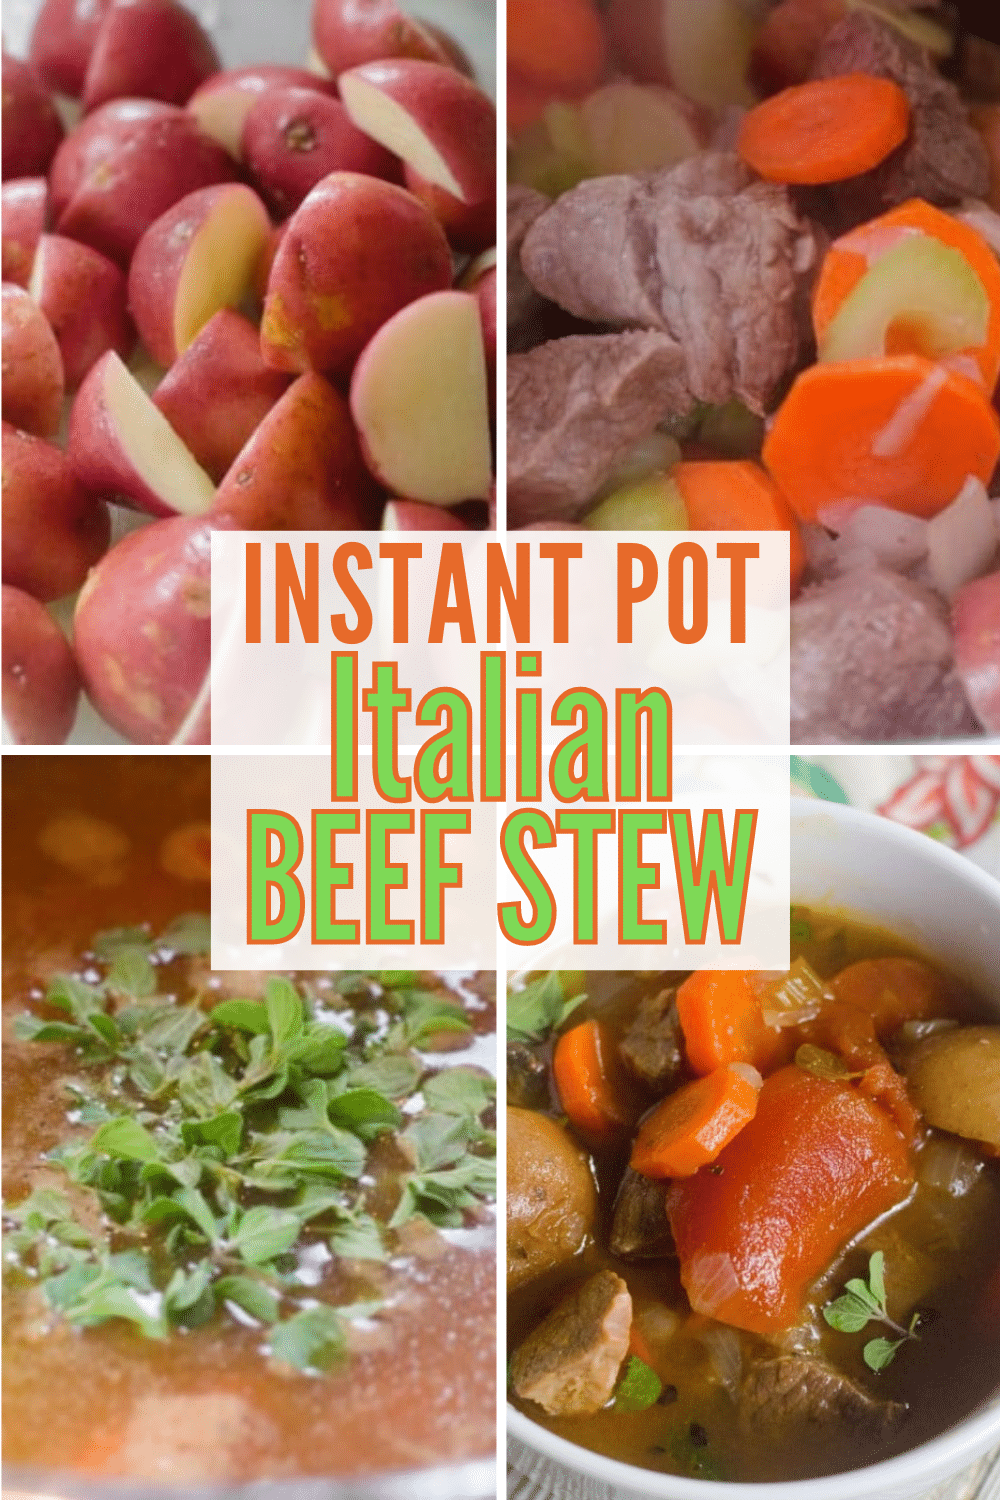 You're going to love everything about this Instant Pot Italian Beef Stew! It's easy, ready quickly, full of great flavor and colors, and is super satisfying! #instantpot #pressurecooker #beefstew #easydinner via @wondermomwannab